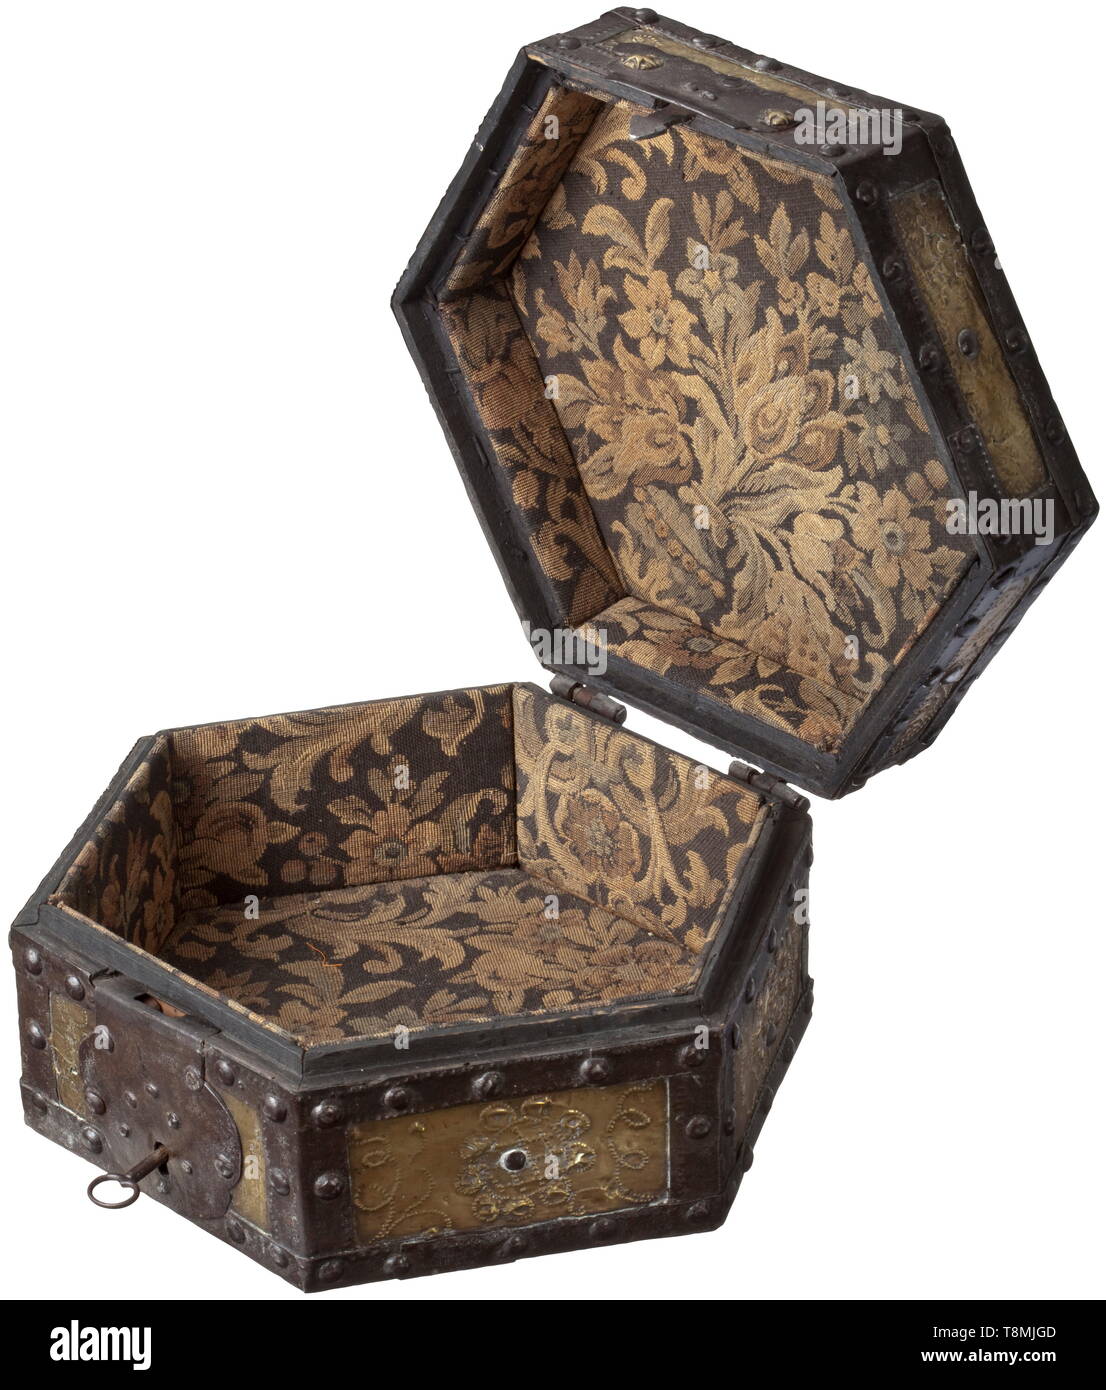 A Dutch hexagonal casket, circa 1680 Wooden body with riveted iron band fittings, the sections applied with finely embossed sheet brass. Obverse lock with two star-shaped brass studs, hollow shank key. The hinged lid with movable iron handle. The interior lined with greenish gobelin cloth featuring blossoms and tendrils. Size 14 x 27 x 23 cm. Provenance: A.J.G. Verster Collection, depicted in: Verster, A.J.G, Bronze - Altes Gerät aus Bronze, Messing und Kupfer, Hanover 1966, no. 56. historic, historical, handicrafts, handcraft, craft, object, obj, Additional-Rights-Clearance-Info-Not-Available Stock Photo